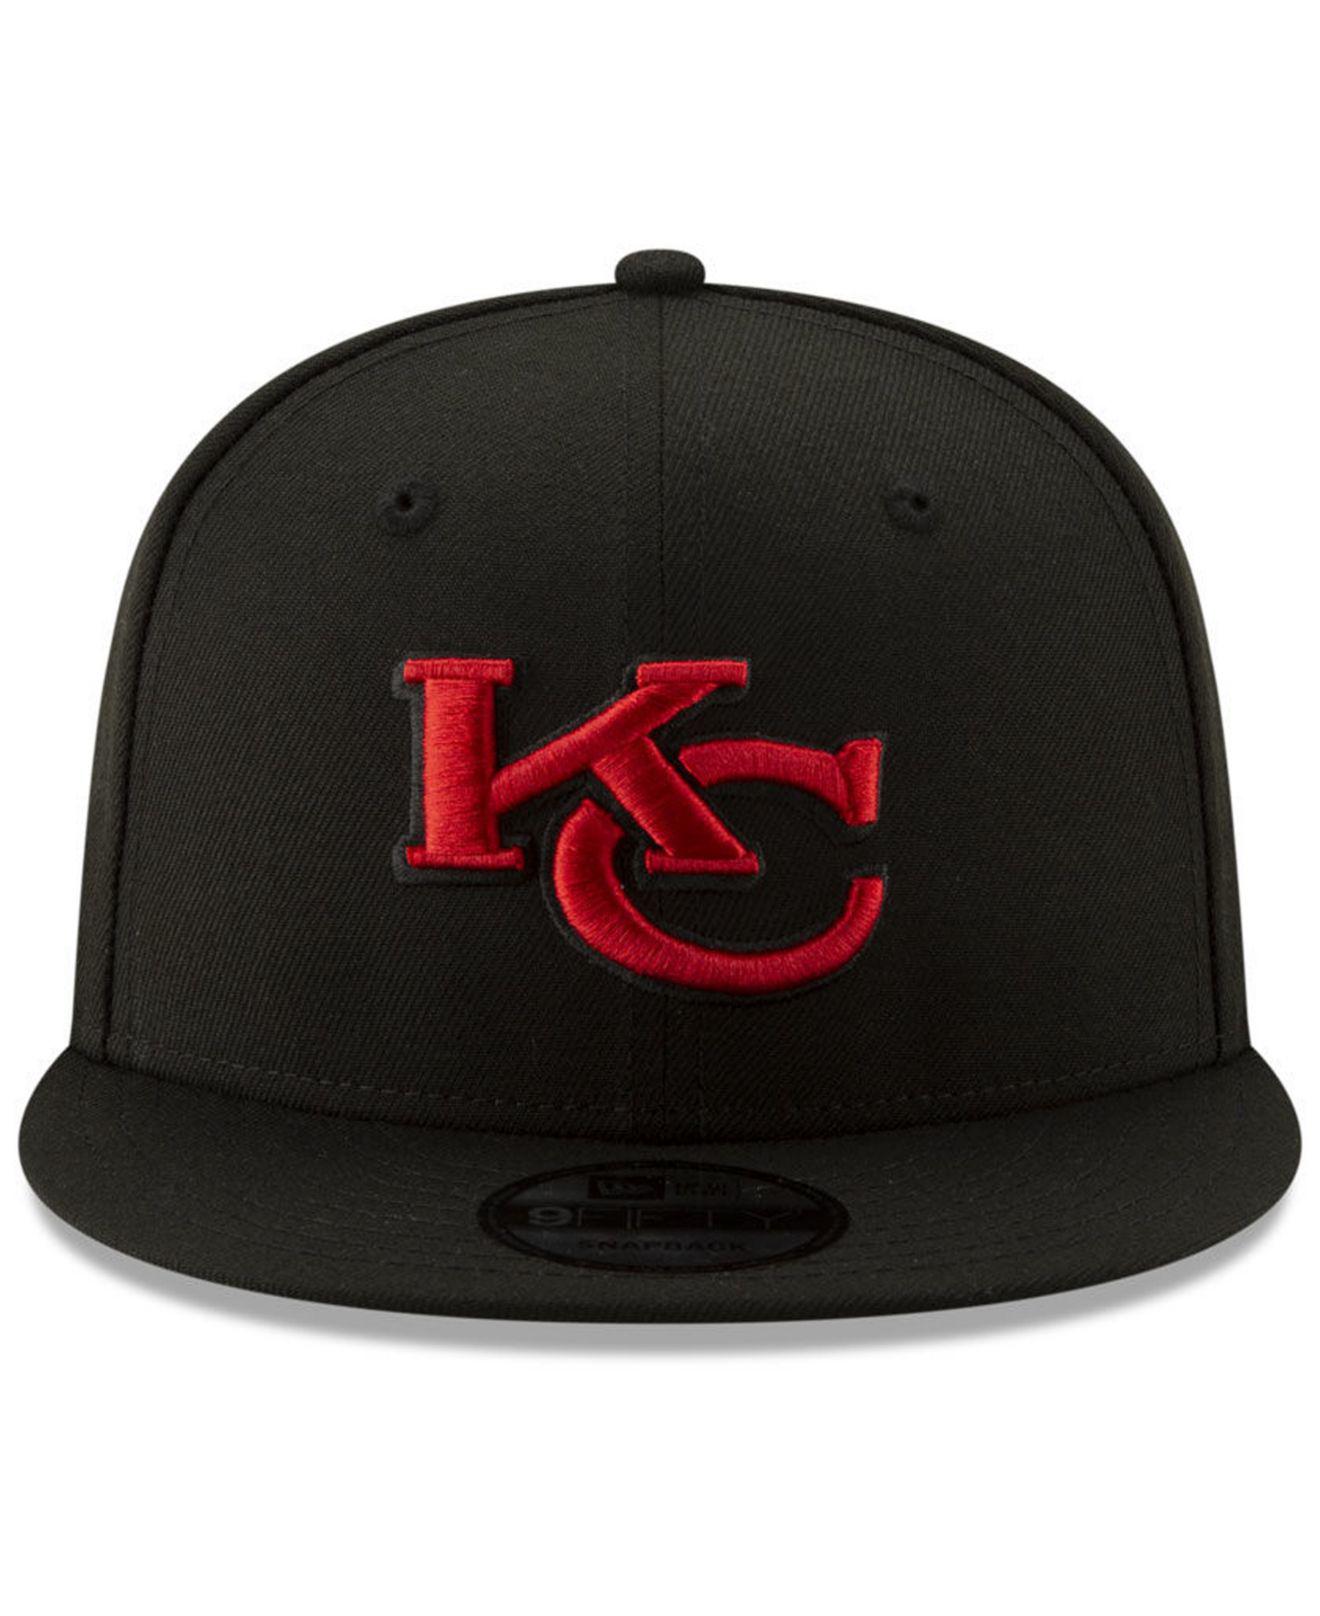 kansas city chiefs fitted hats